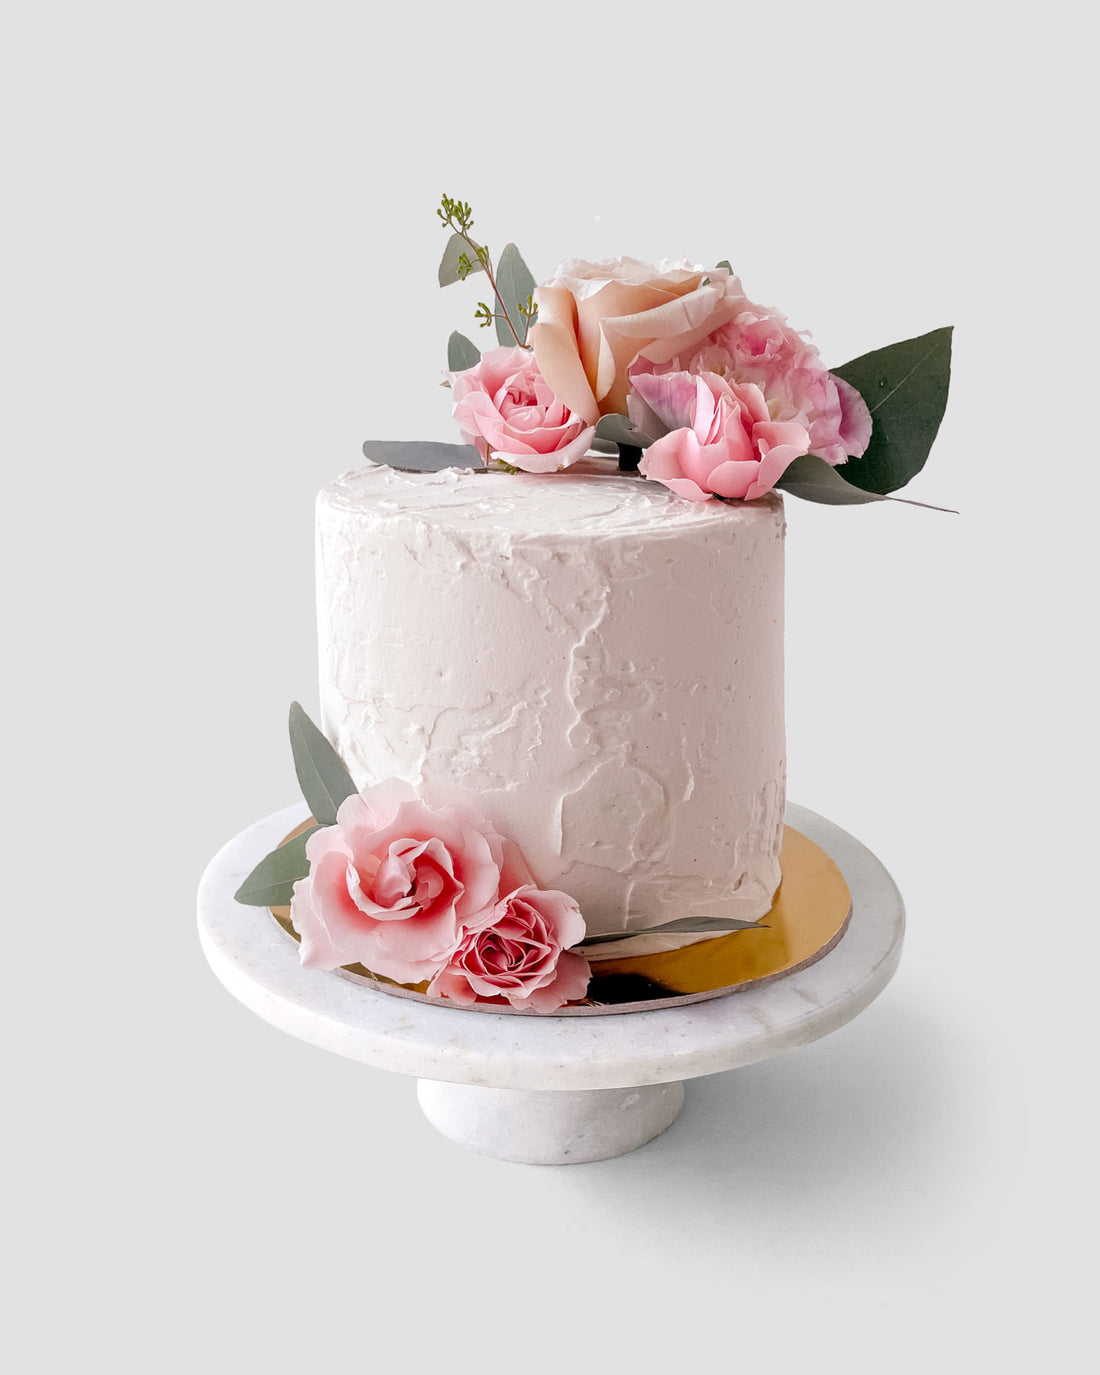 Cute Flower (Birthday Cake by Crepes) – CHIẾC BÁNH NHỎ